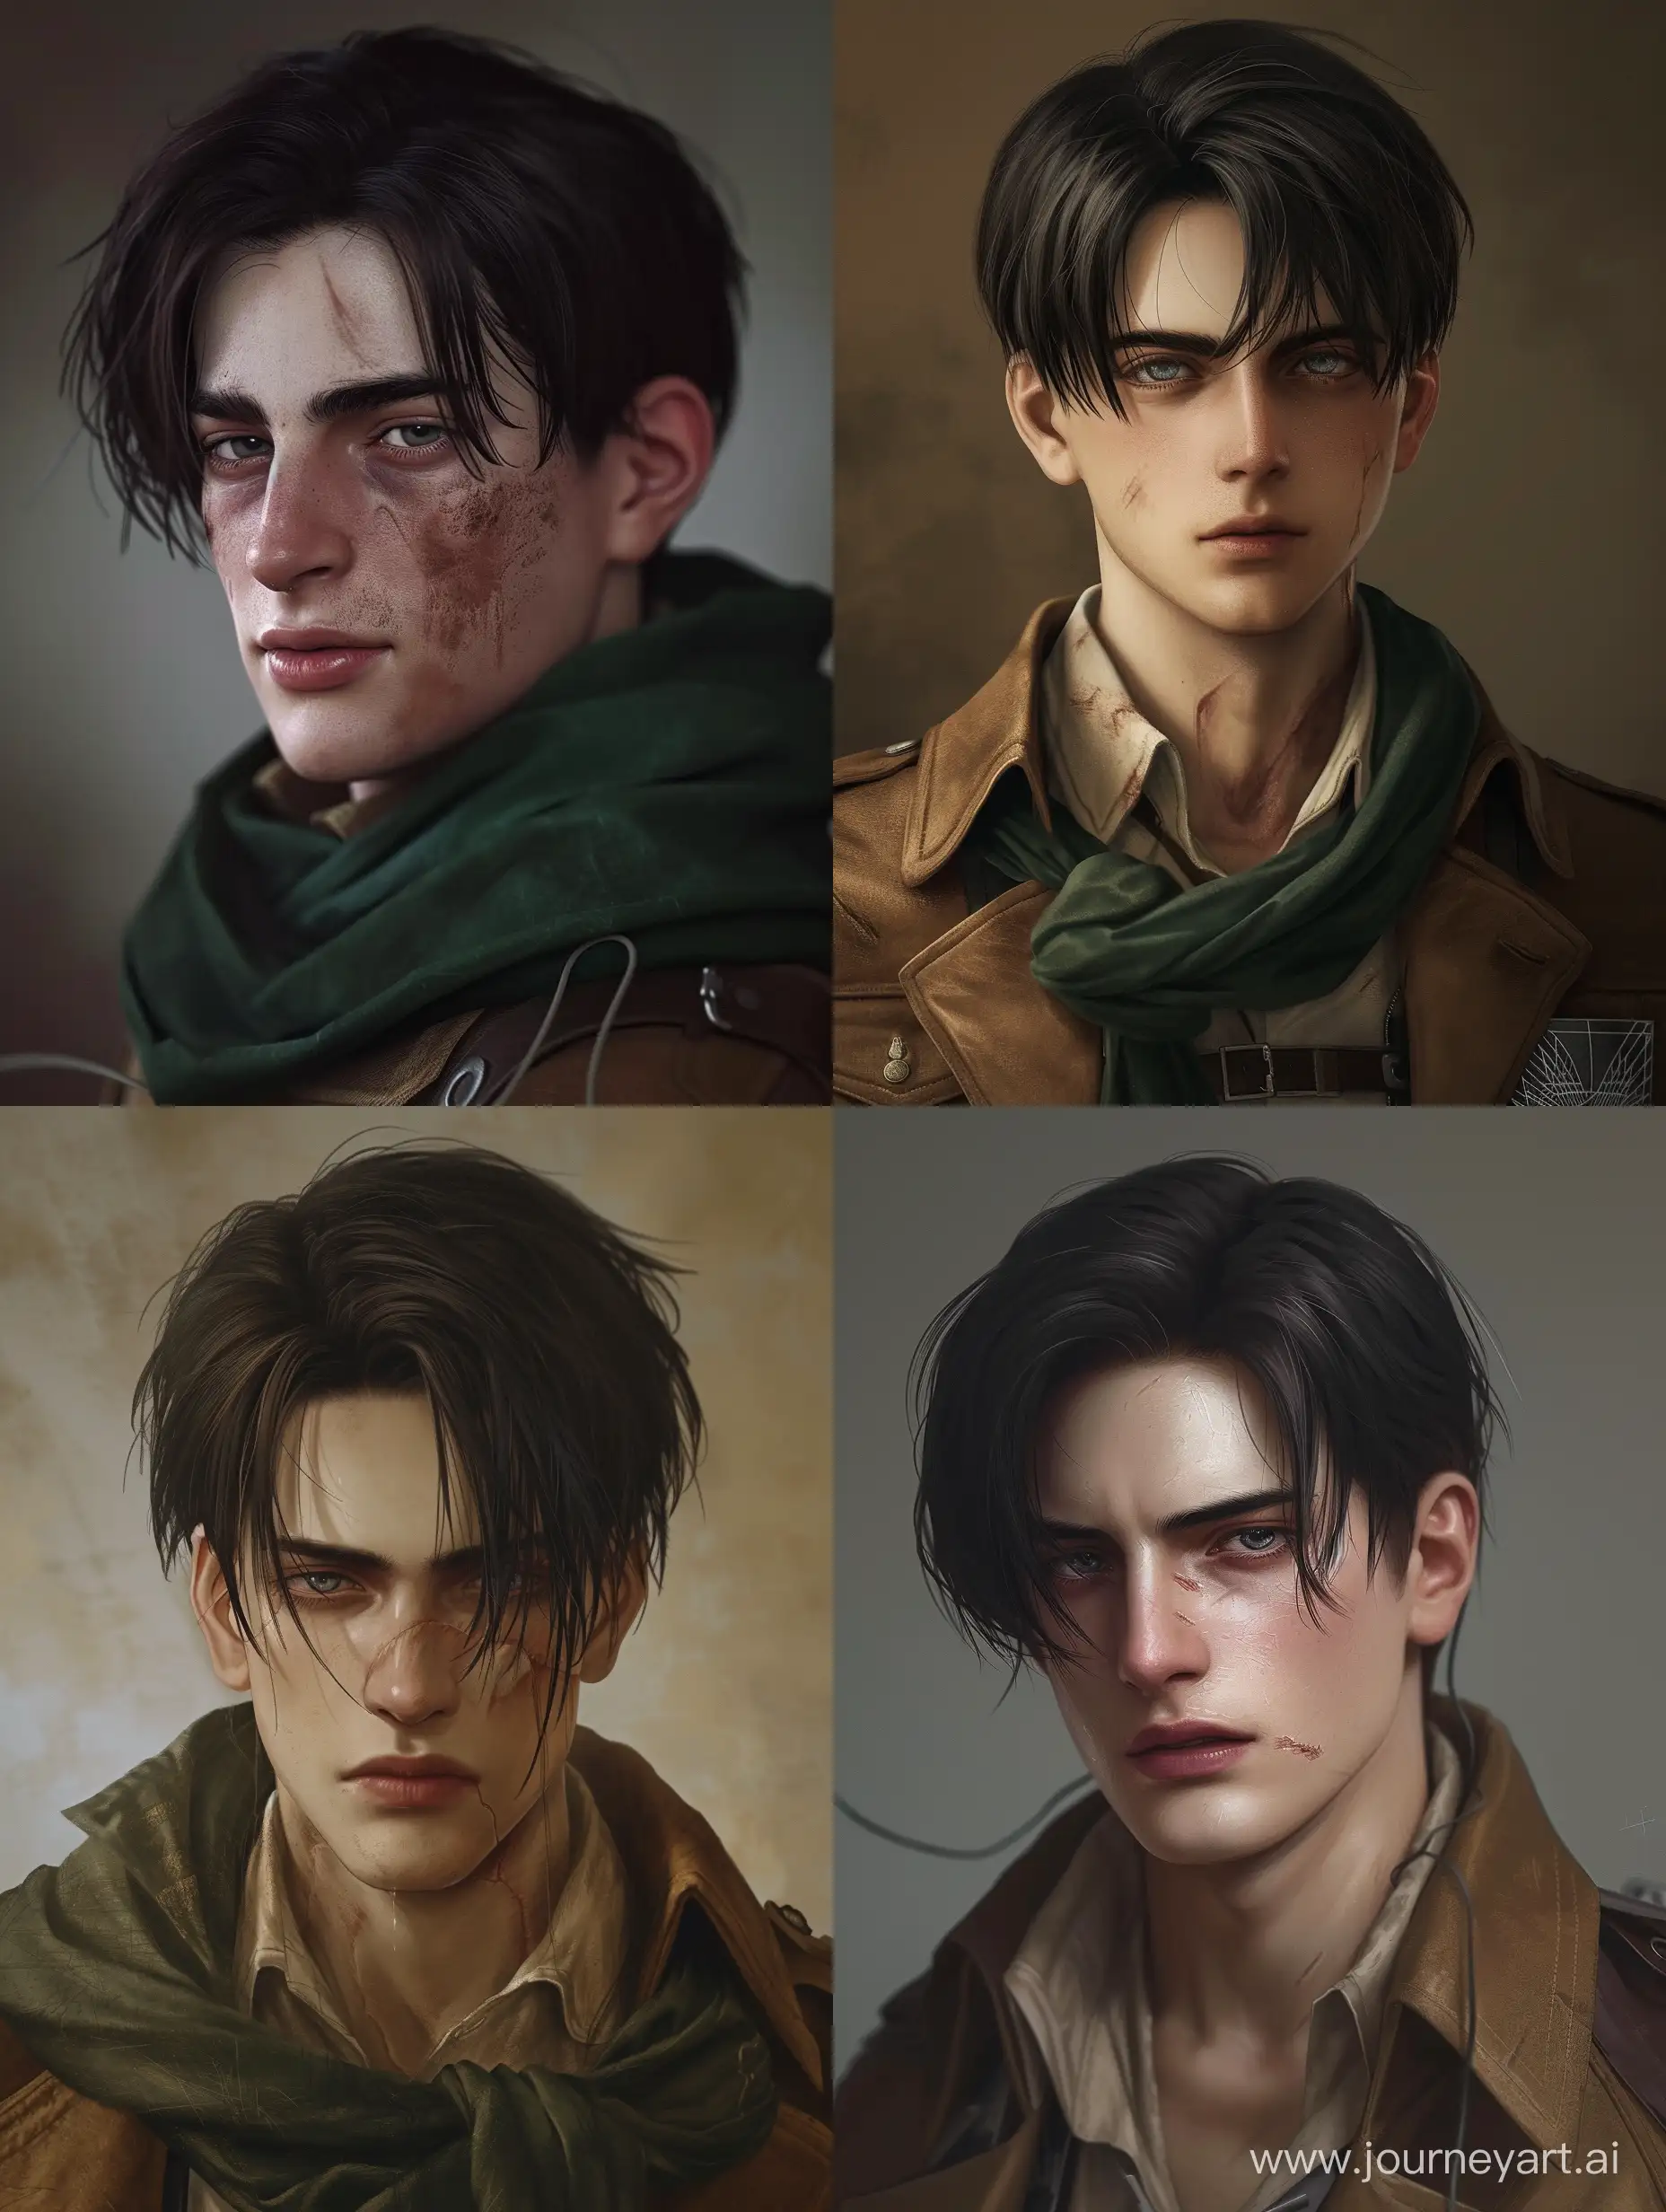 Realistic Levi Ackerman from Attack on Titan, in his 30s, with normal dark circles, slight mocking smirk